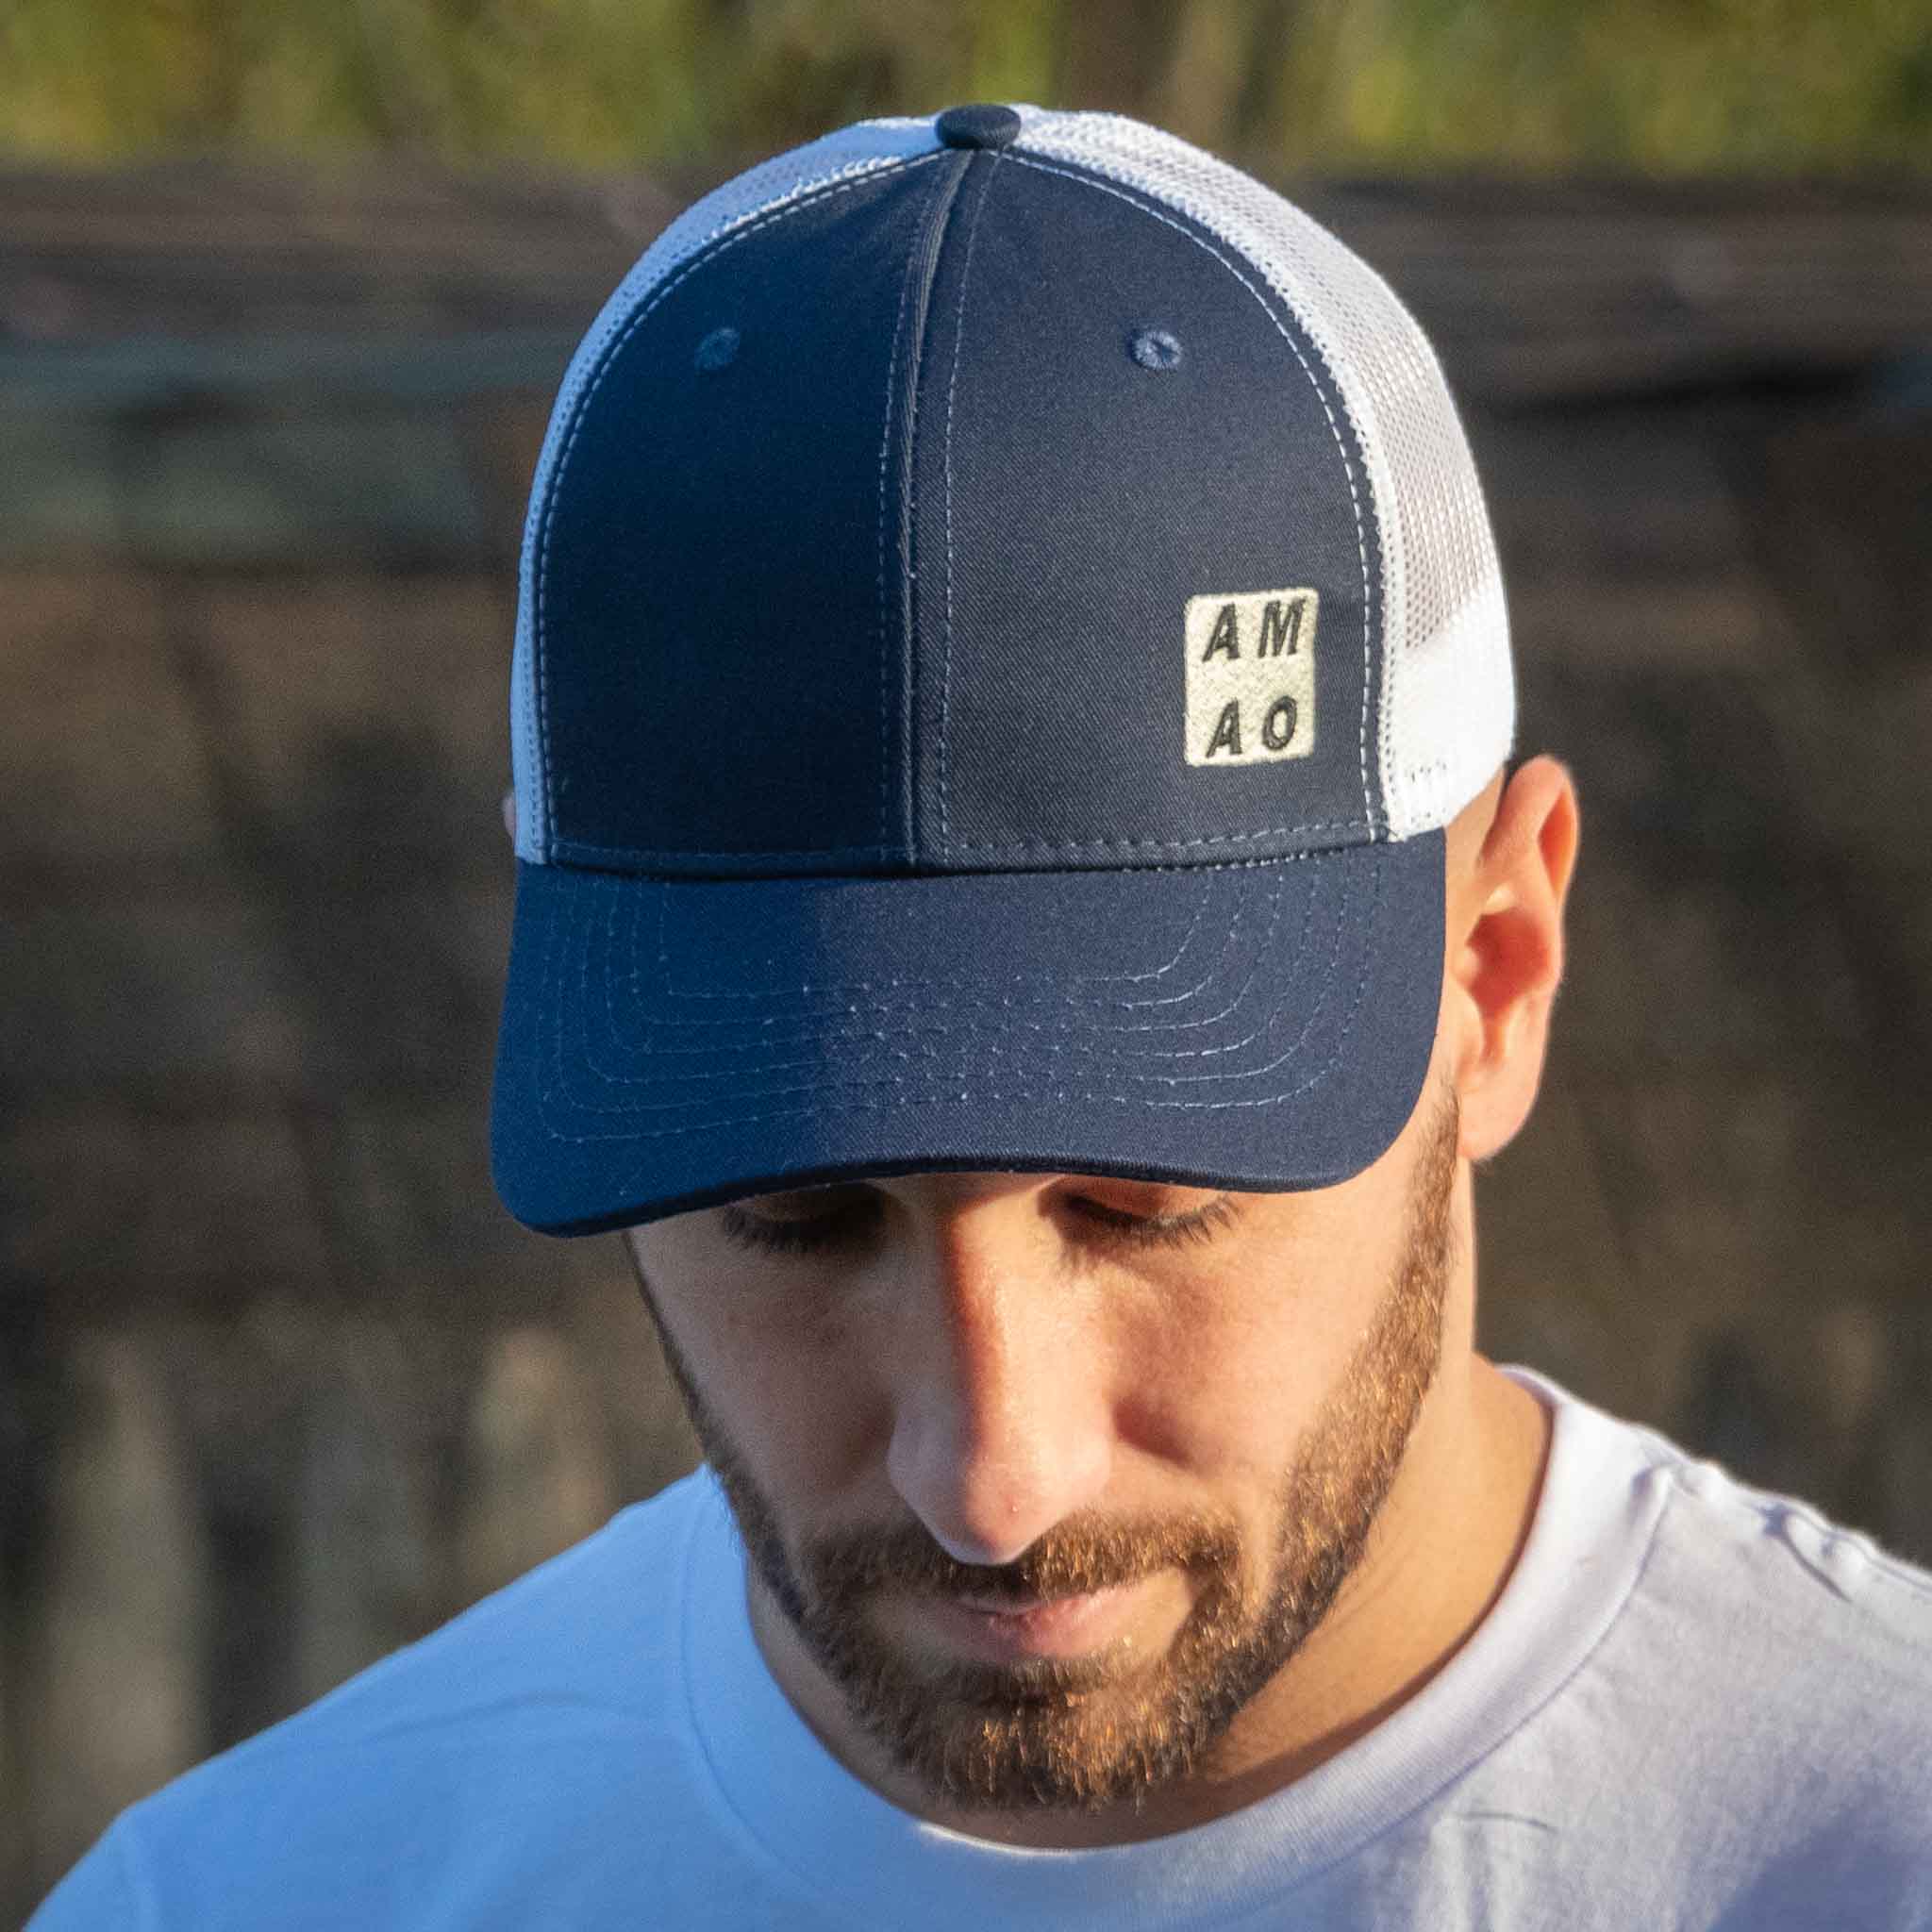 AMAO 1003 Trucker Hat - Navy w-White Mesh - Compare at $69